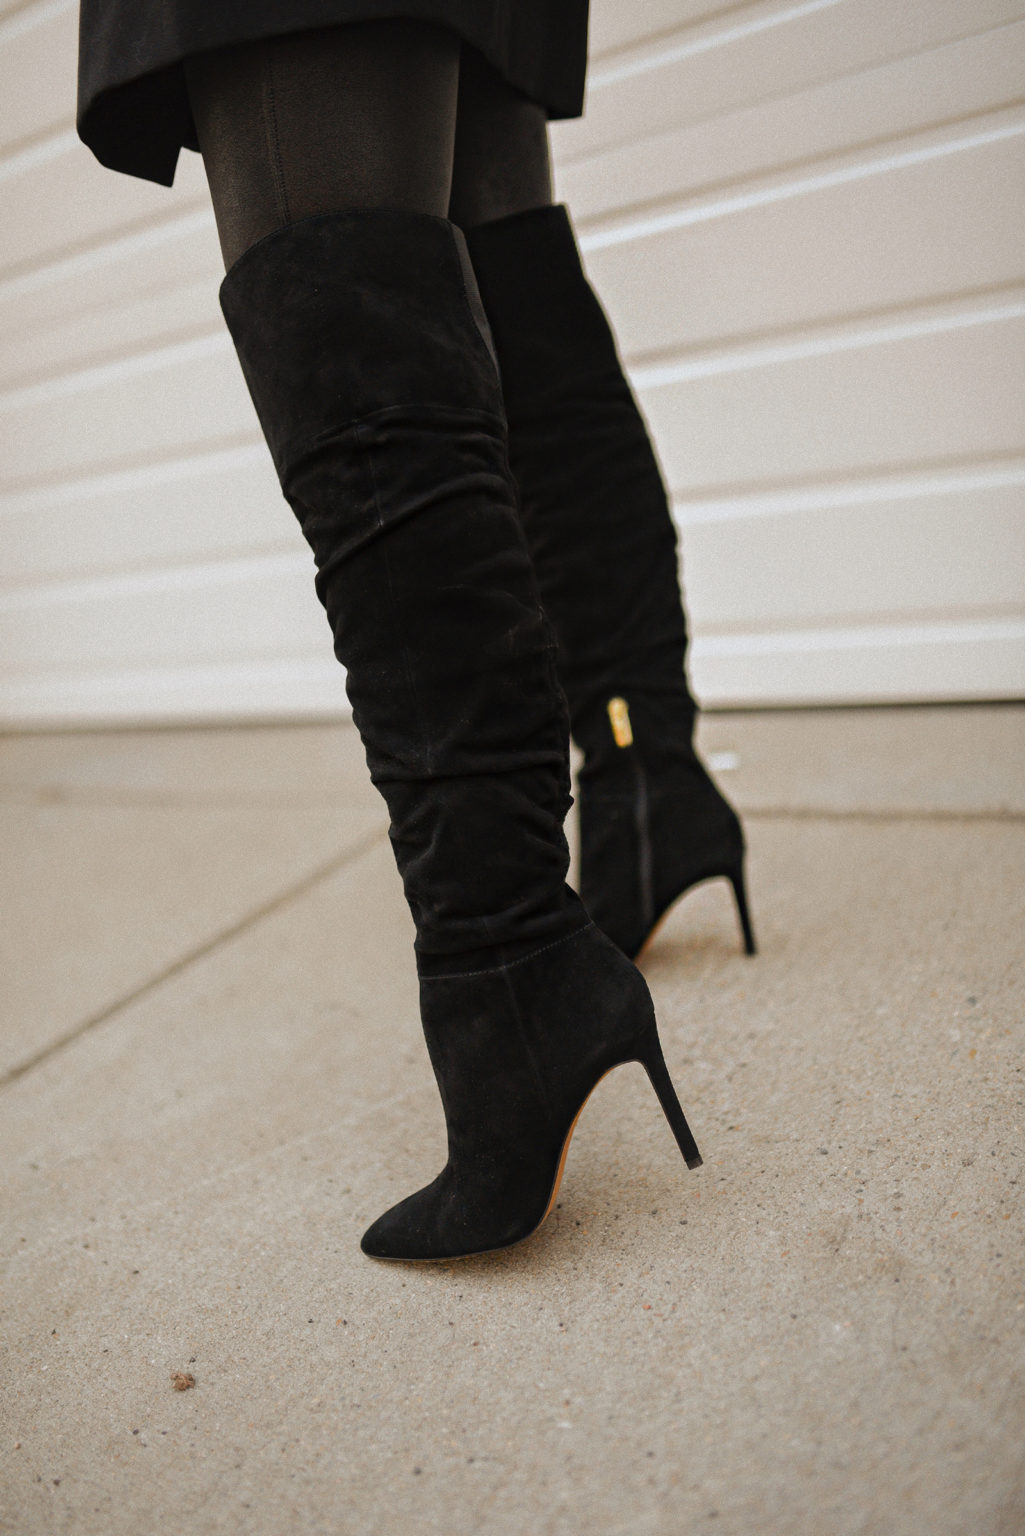 A TOTAL BLACK LOOK FOR VALENTINE’S DAY | CHIC TALK | CHIC TALK